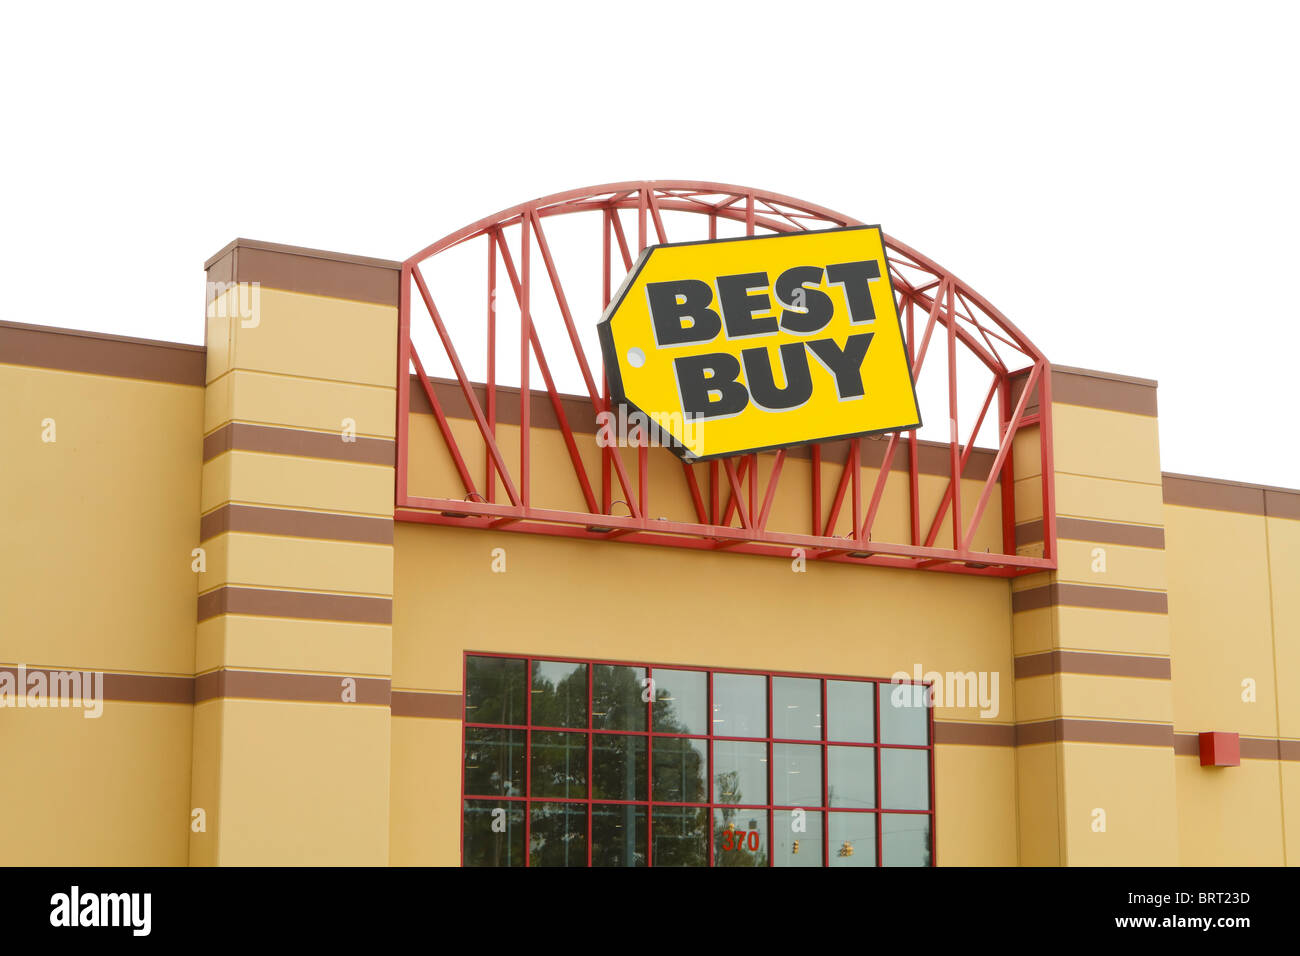 The front entrance and logo trademark sign for a Best Buy retail electronics store on a cloudy overcast day. Stock Photo